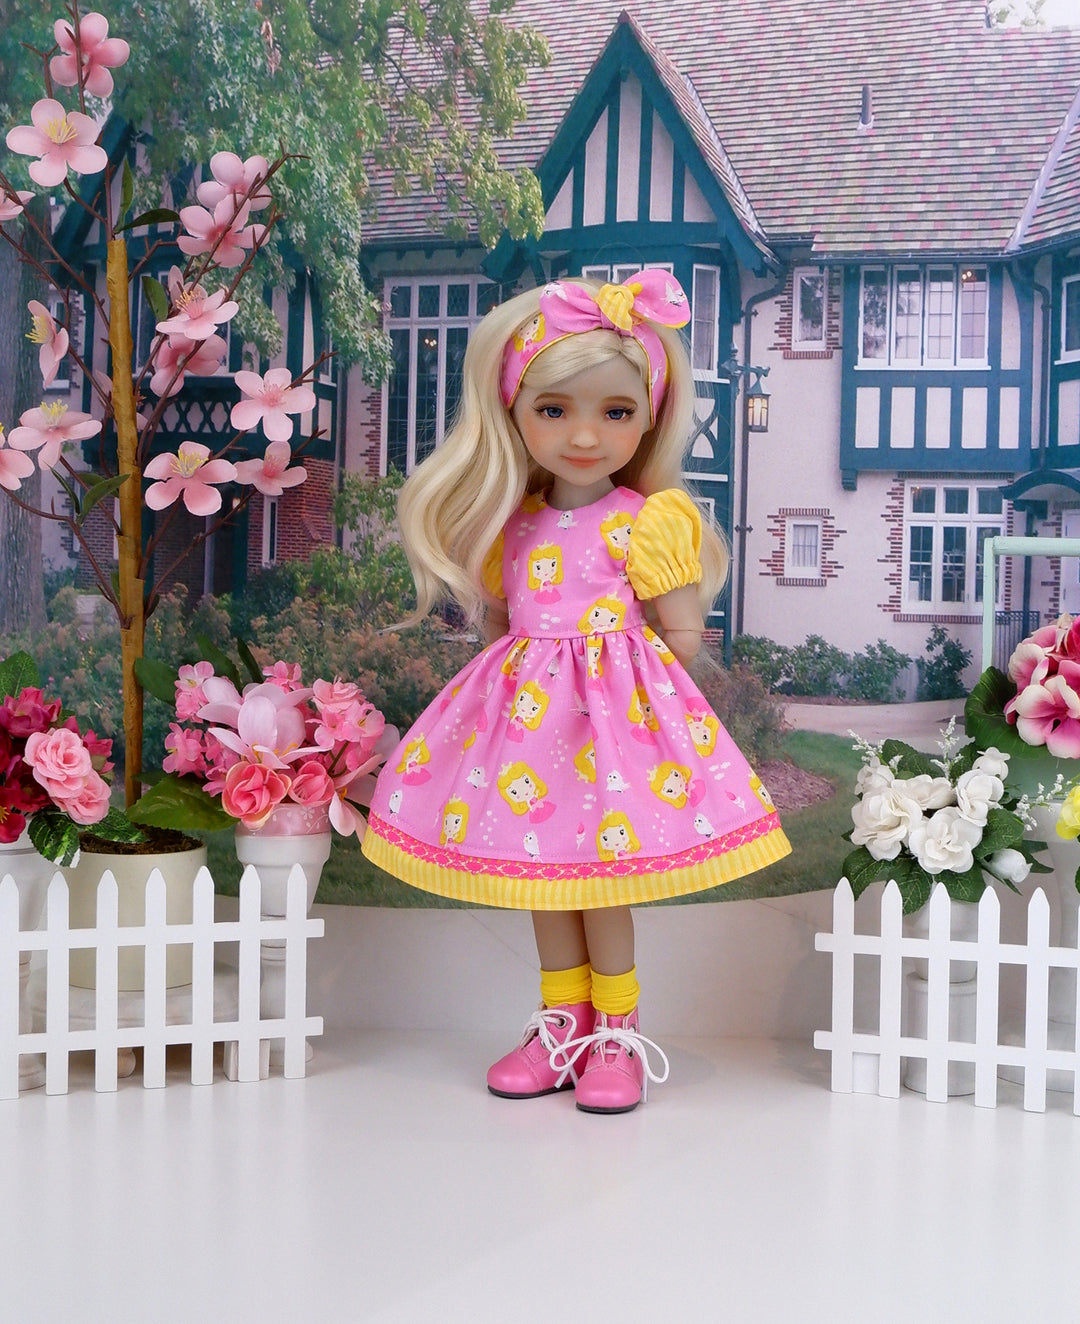 Kawaii Sleeping Beauty - dress and boots for Ruby Red Fashion Friends doll